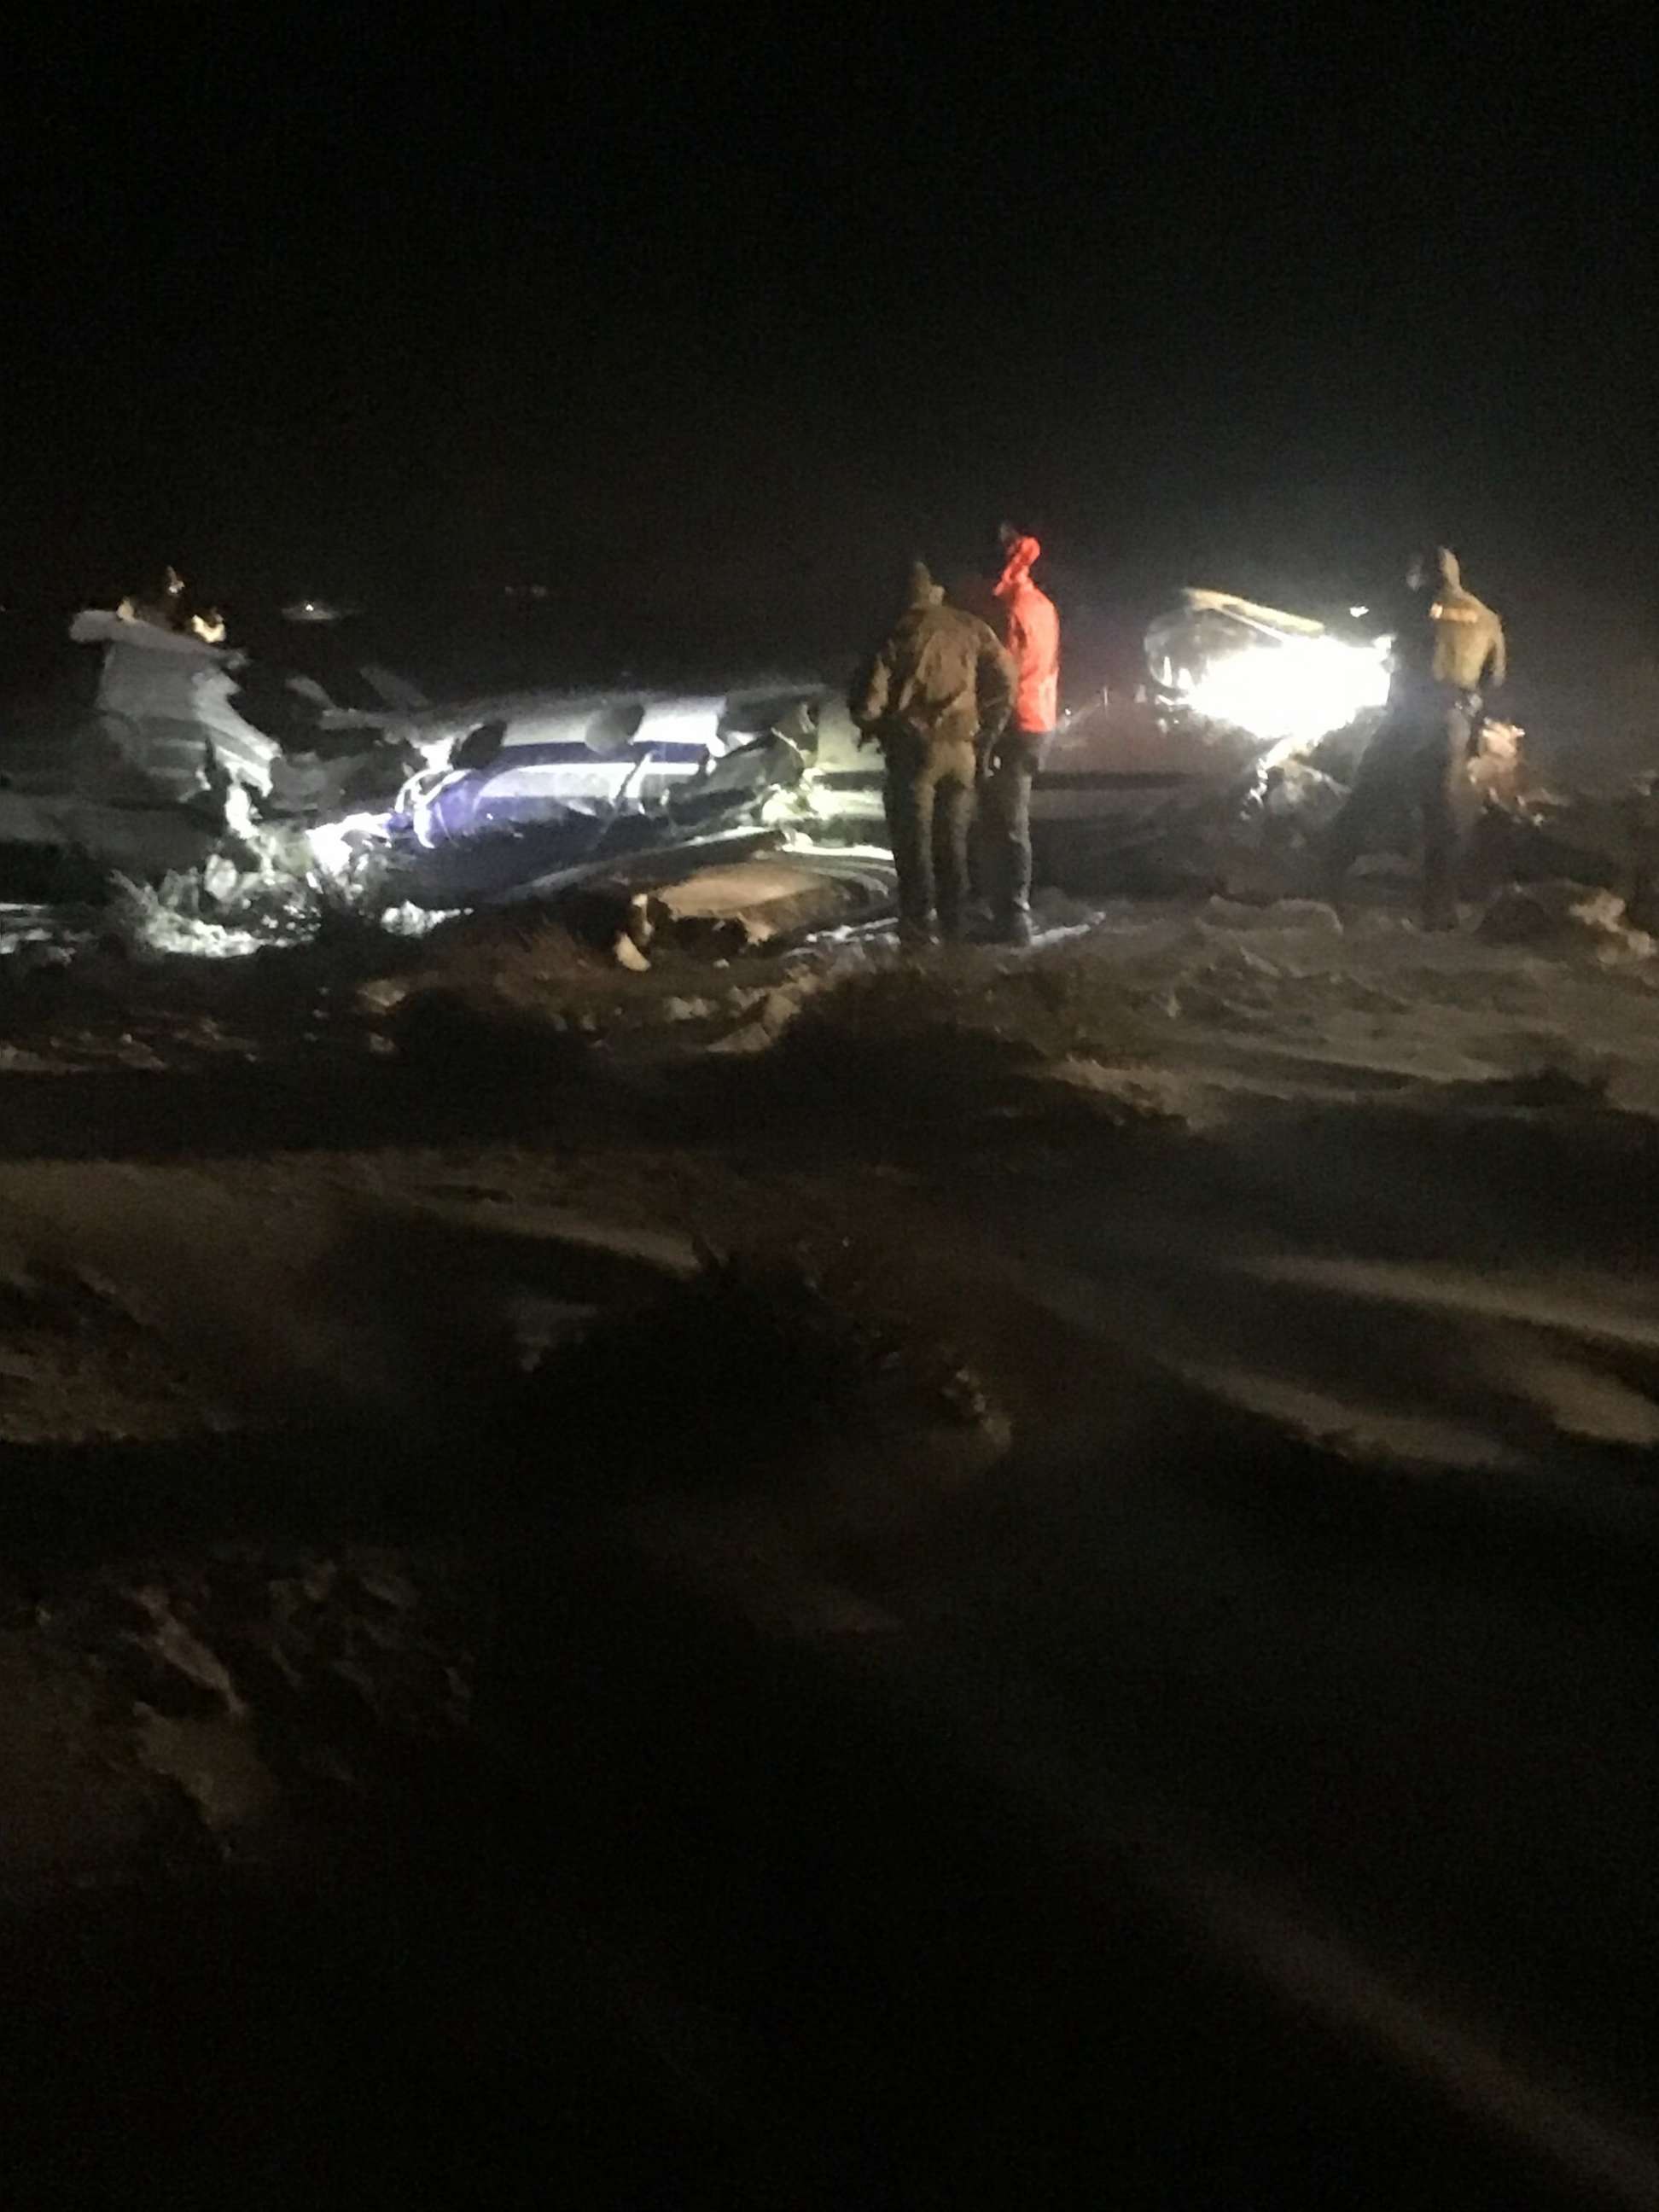 PHOTO: Five people were killed, including a patient and medical personnel, after a Care Flight plane crashed late Friday, Feb. 24, 2023, near Stagecoach, Nev.